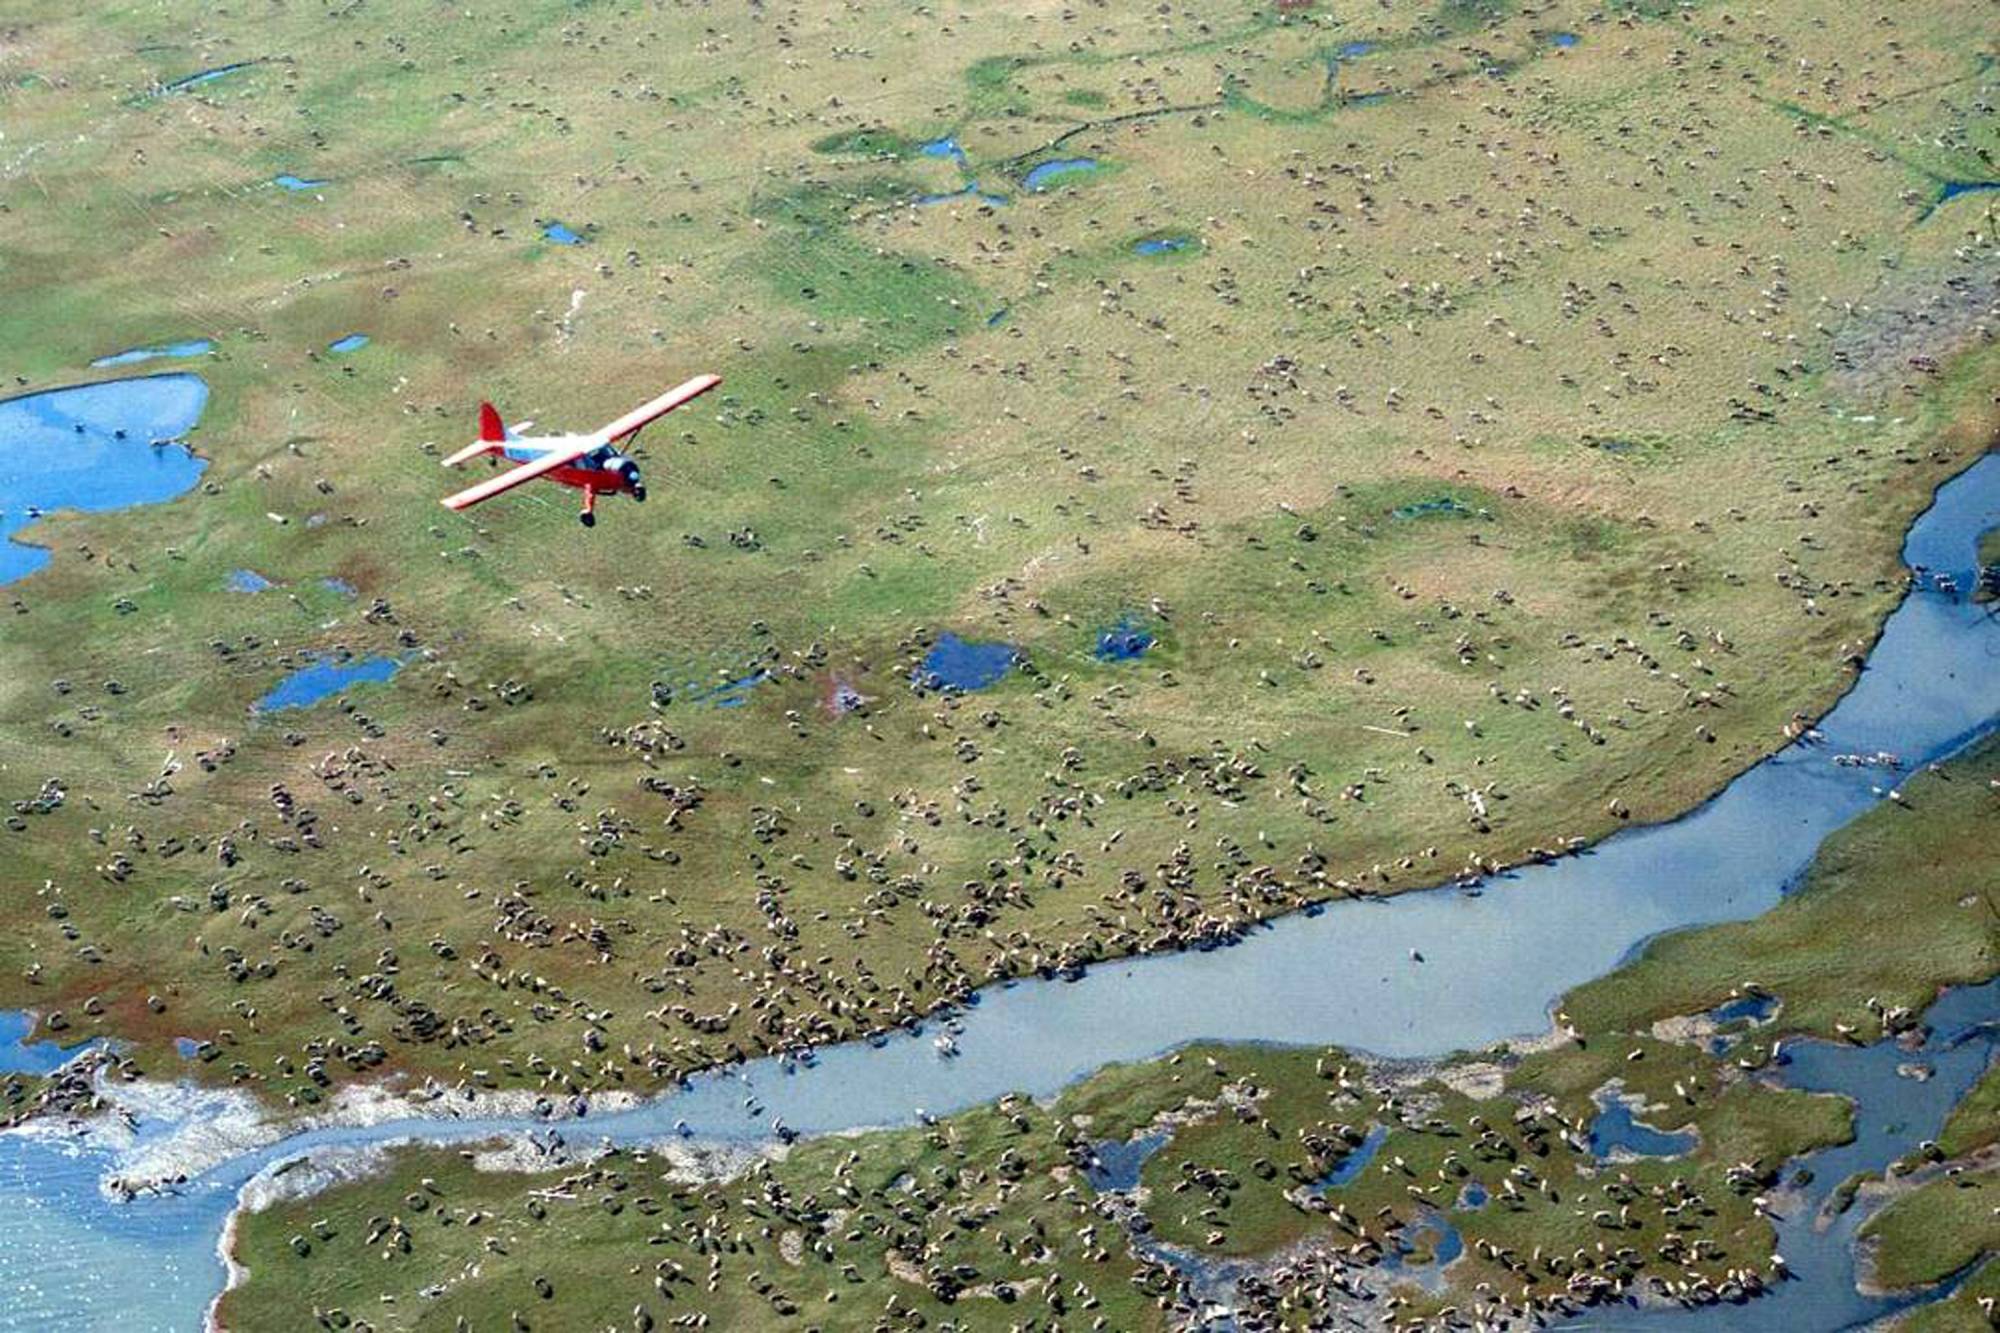 FILE - In this undated photo provided by the U.S. Fish and Wildlife Service, an airplane flies over caribou from the Porcupine Caribou Herd on the coastal plain of the Arctic National Wildlife Refuge in northeast Alaska.The Department of the Interior has approved an oil and gas leasing program within Alaska’s Arctic National Wildlife Refuge. The refuge is home to polar bears, caribou and other wildlife. Secretary of the Interior David Bernhardt signed the Record of Decision, which will determine where oil and gas leasing will take place in the refuge’s coastal plain.  (U.S. Fish and Wildlife Service via AP)